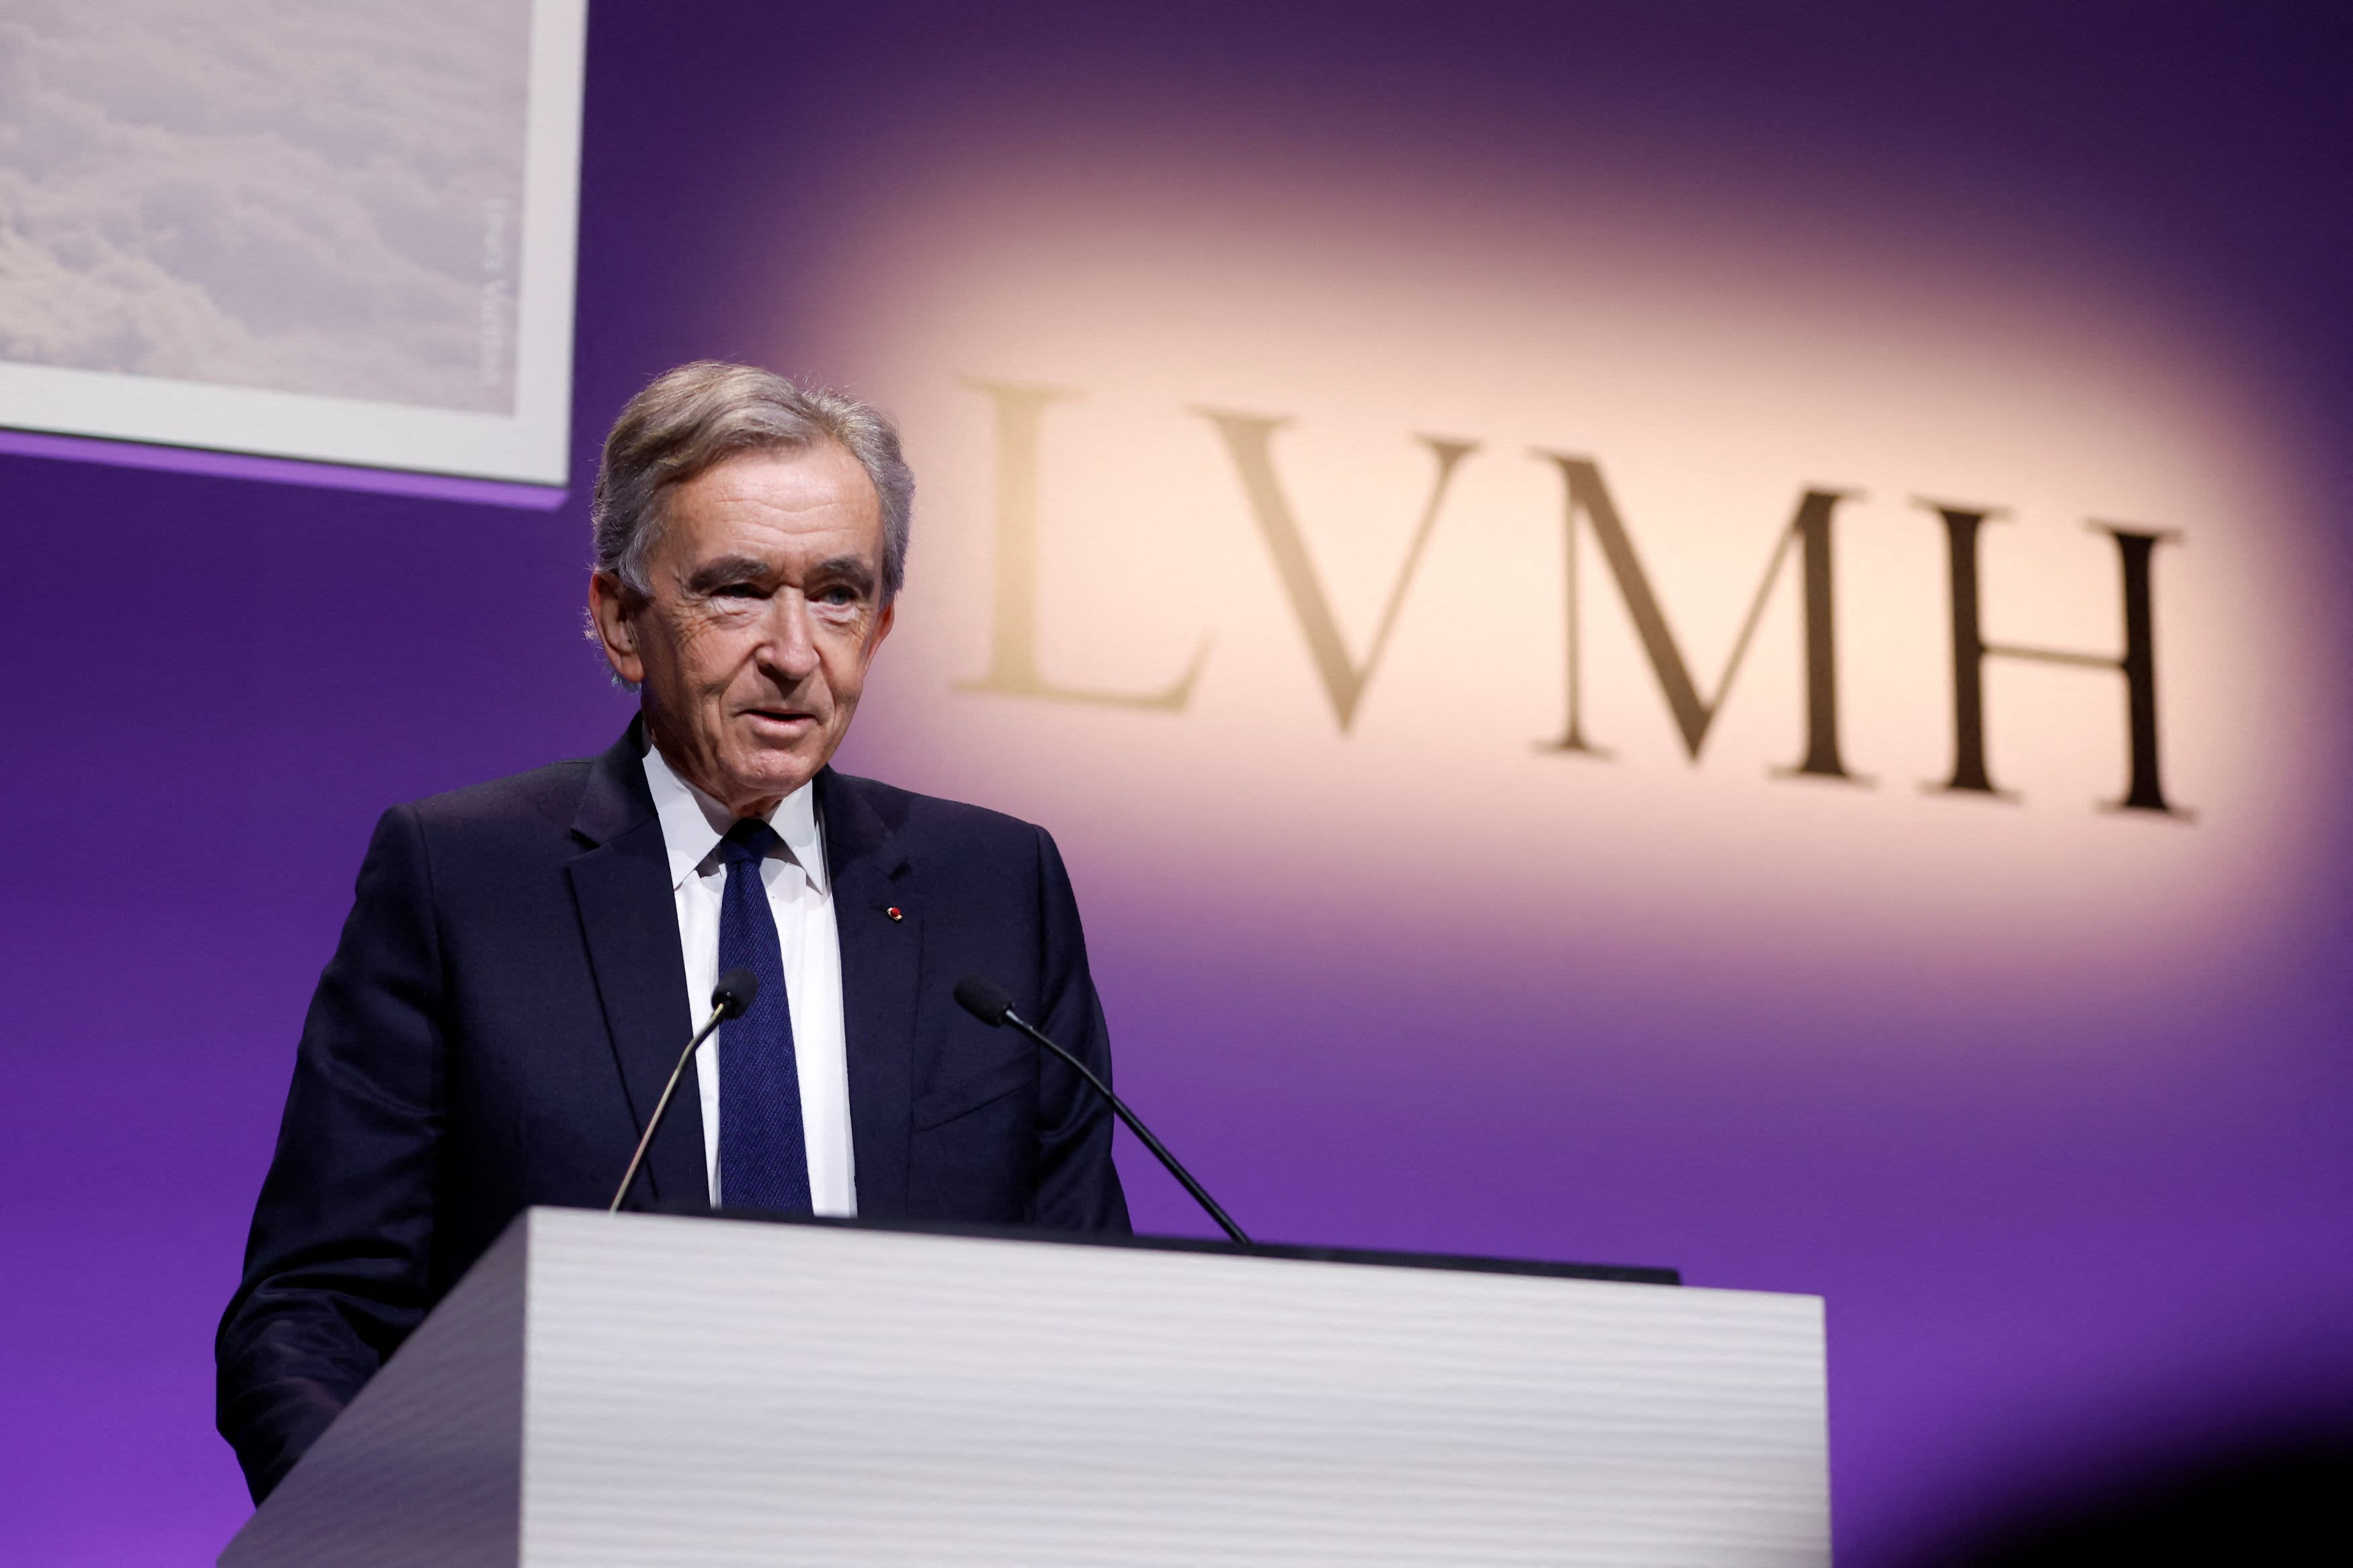 LVMH posted record growth as China reopened